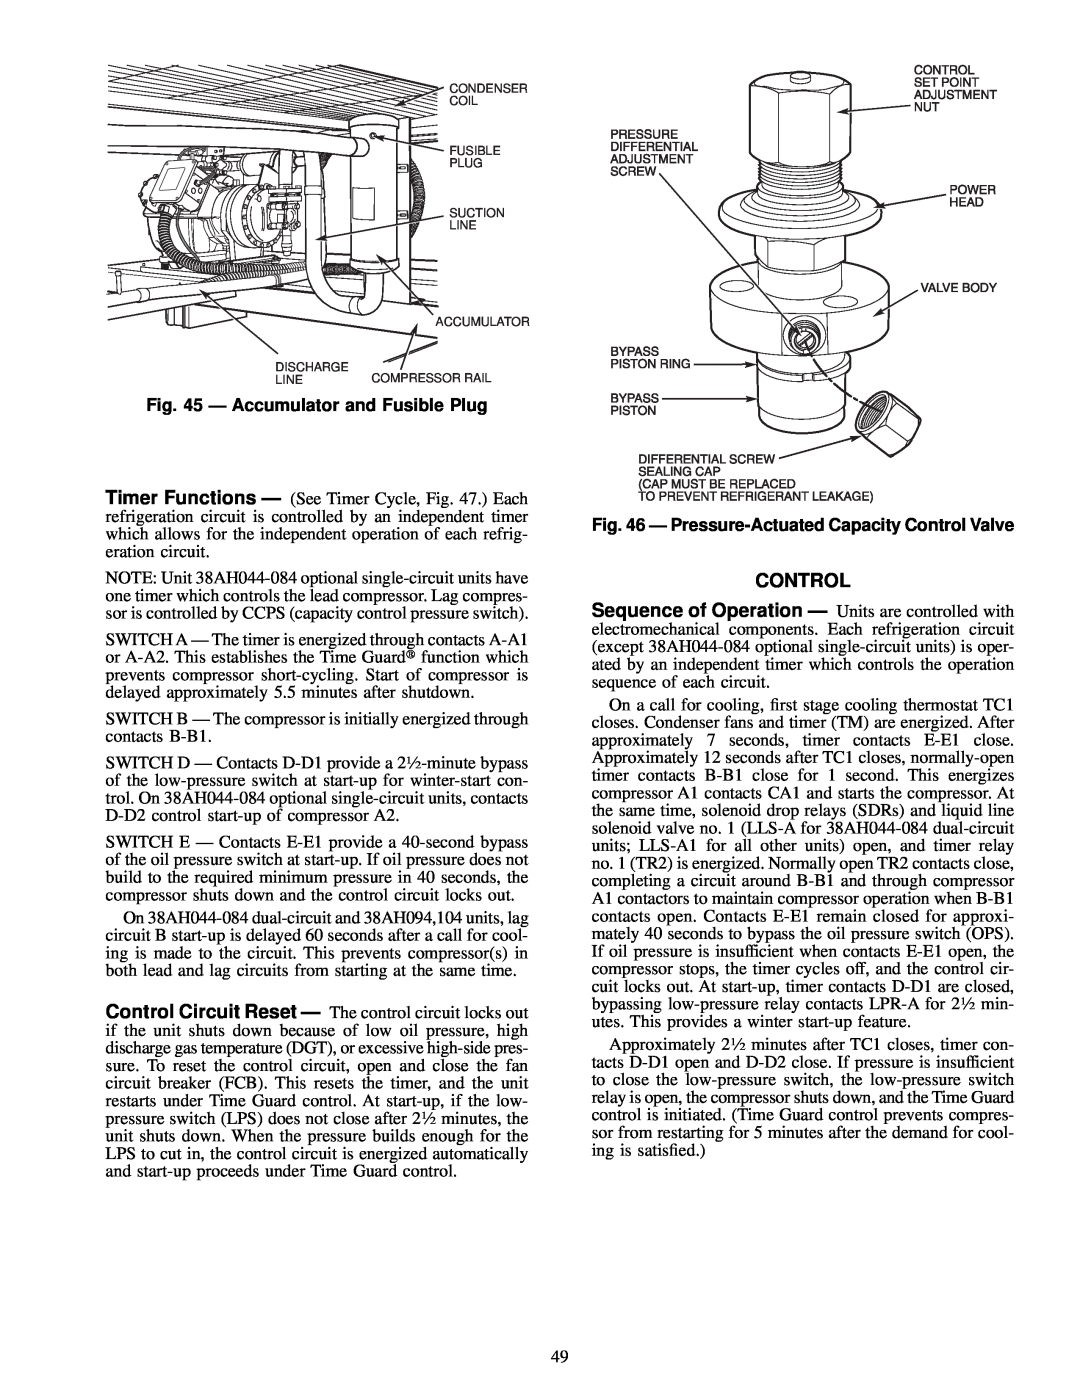 Carrier 38AH044-084 specifications Ð Accumulator and Fusible Plug, Ð Pressure-ActuatedCapacity Control Valve 